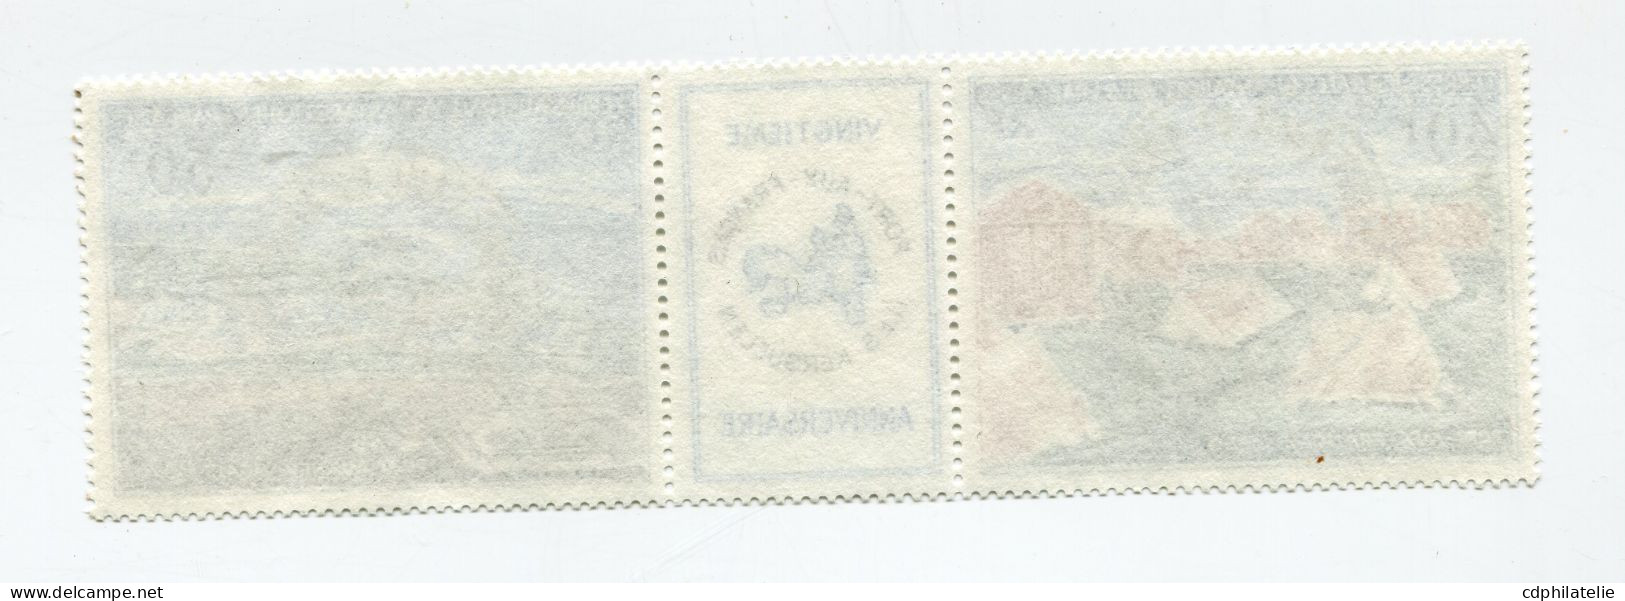 T. A. A. F. PA 26A O PORT-AUX-FRANCAIS - Used Stamps